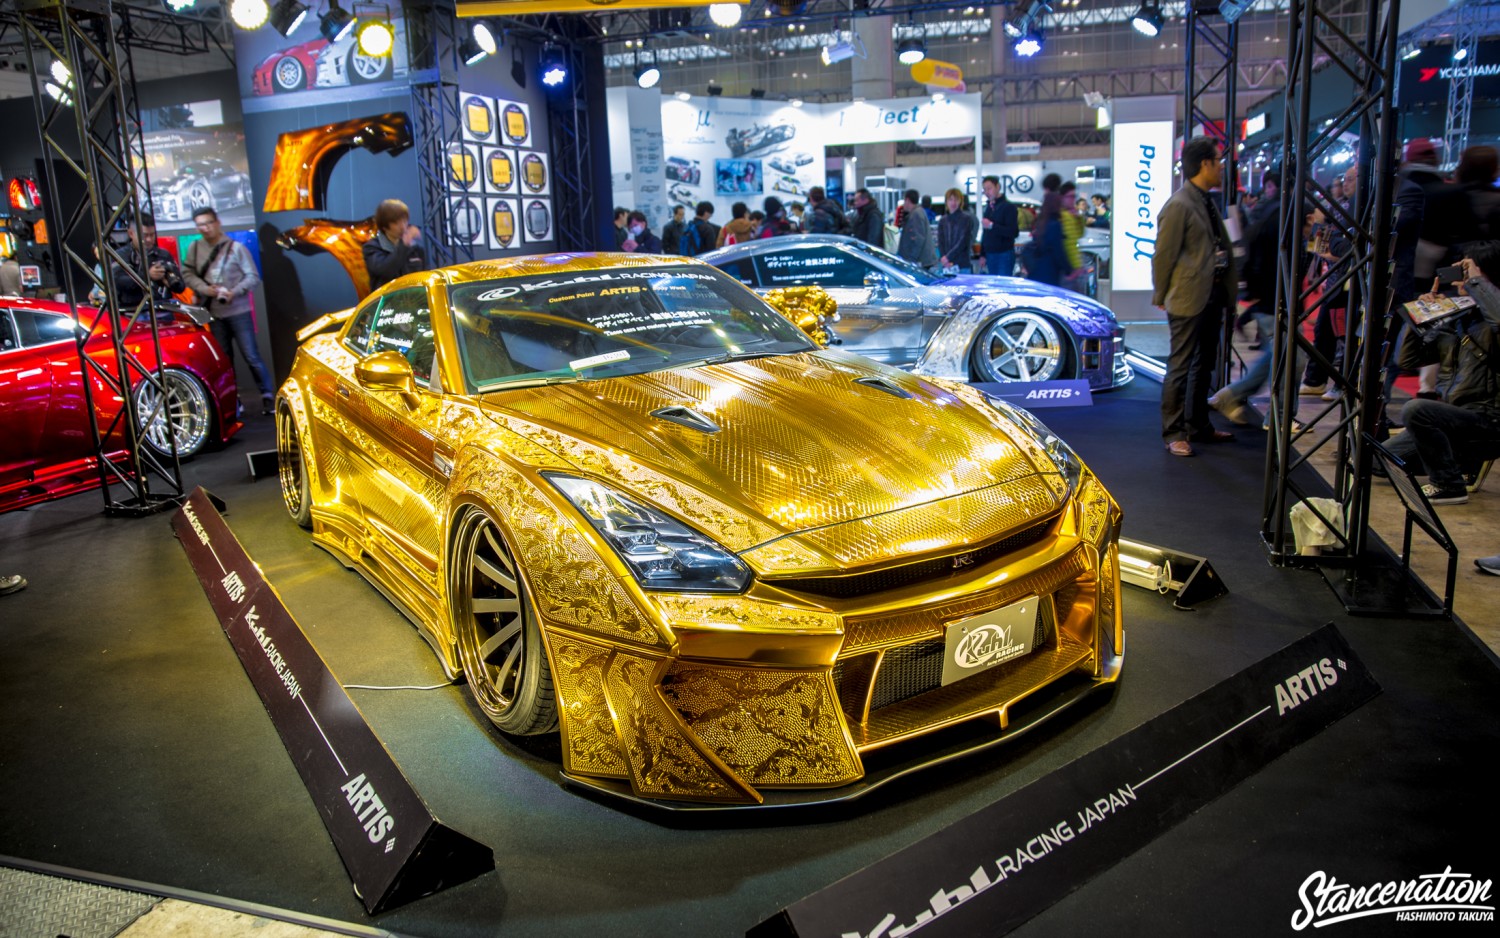 bao surprise super product gold plated godzilla gold plated nissan r gtr owned by boxer conor mcgregor costs up to million usd 64e4e37c475bf Surprise 'Suρer ProducT' Gold-Plated Godzillɑ - GoƖd-Plɑted Nιssan R35 GTR Owned By Boxer Conor McGregor Costs Up To 5 Million U.S.D